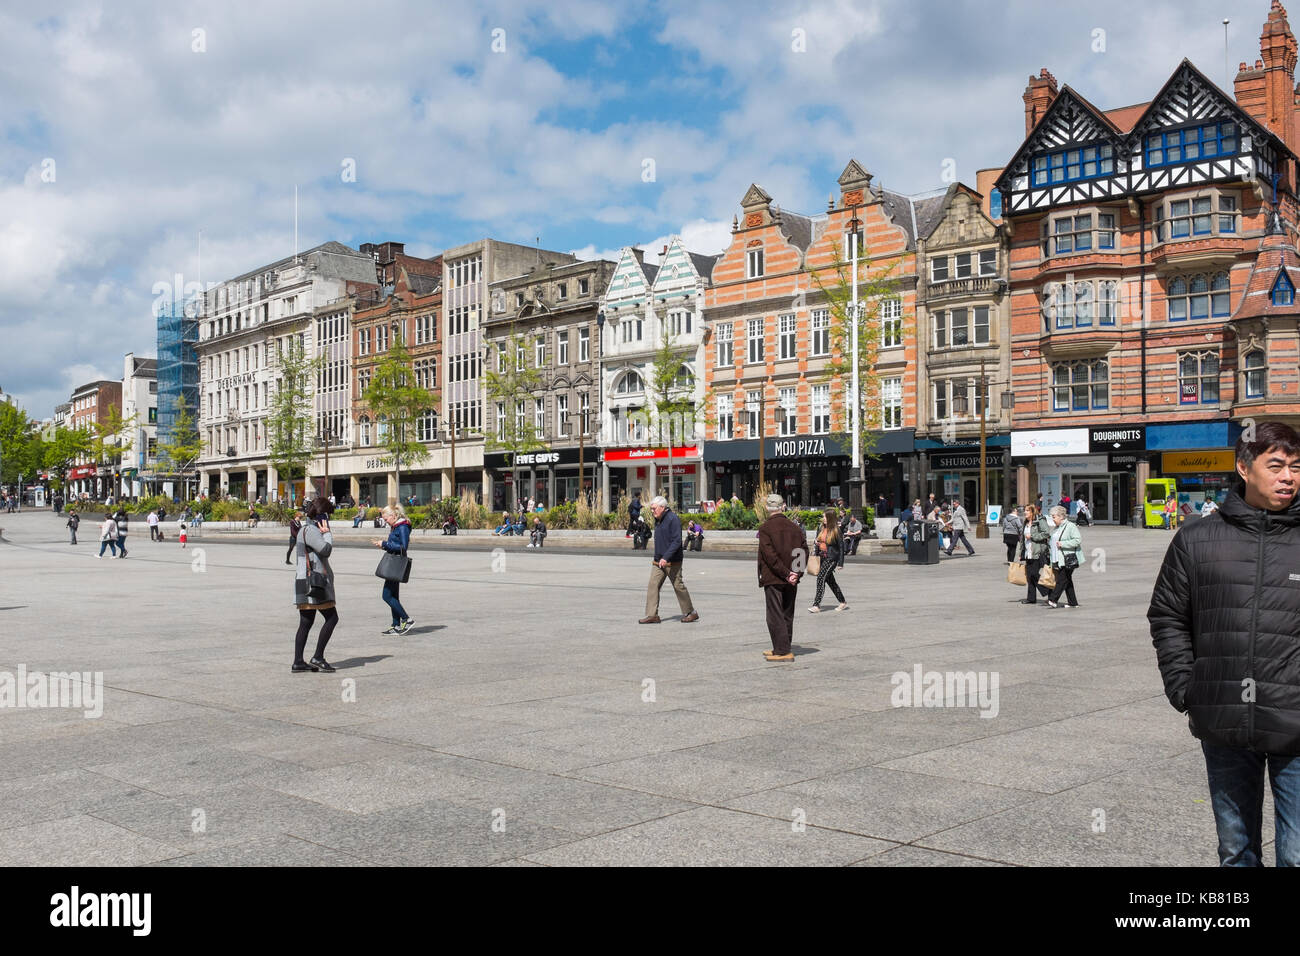 The Old Market Square in the centre of Nottingham Stock Photo